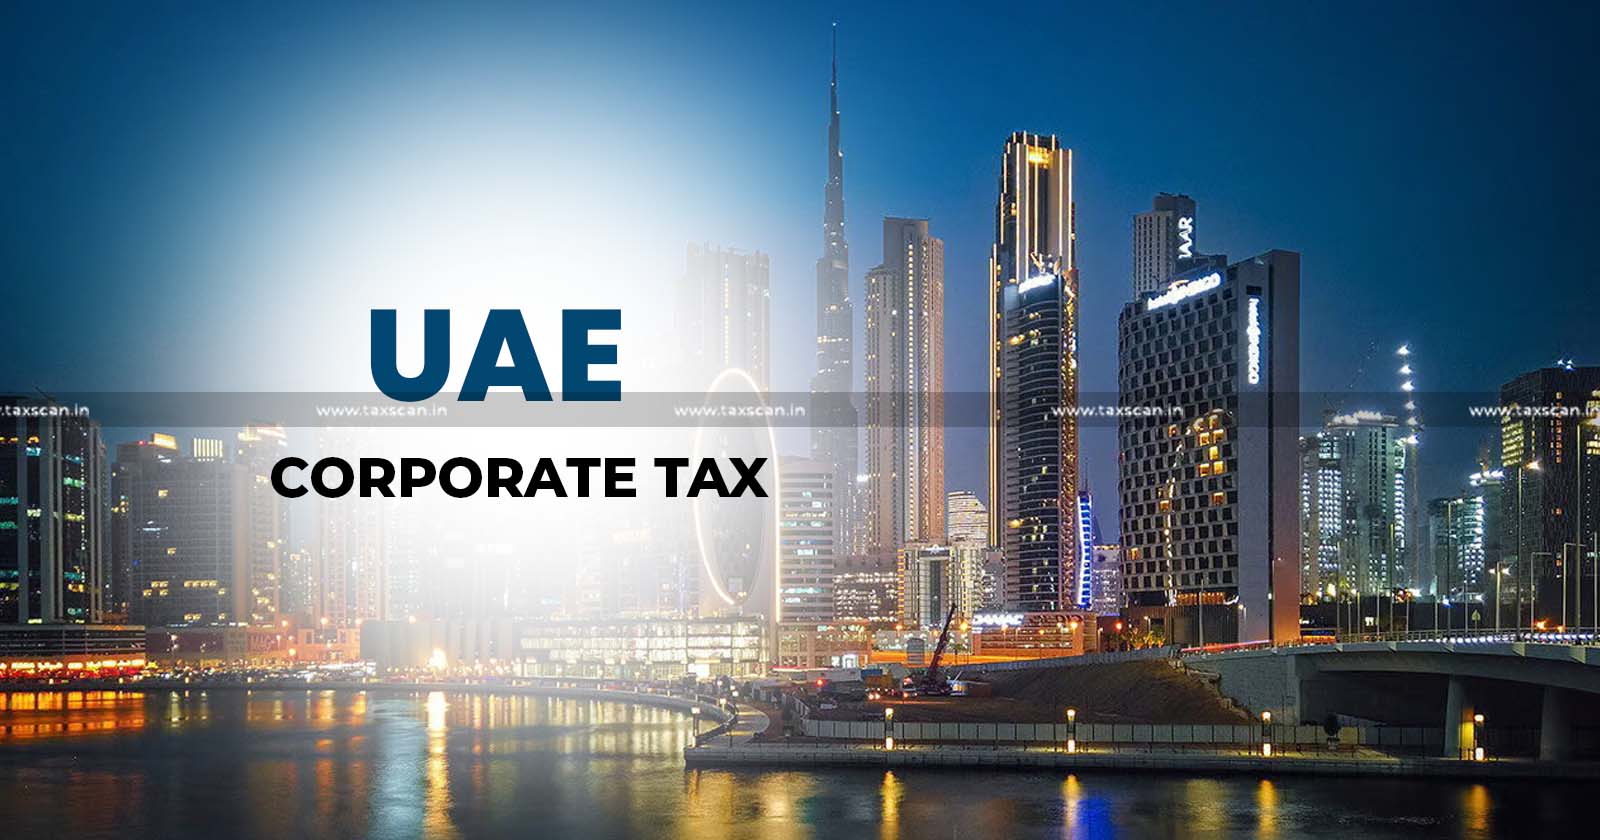 UAE Corporate Tax - Federal Tax Authority - new Decision - specified deadlines for Registration - taxscan